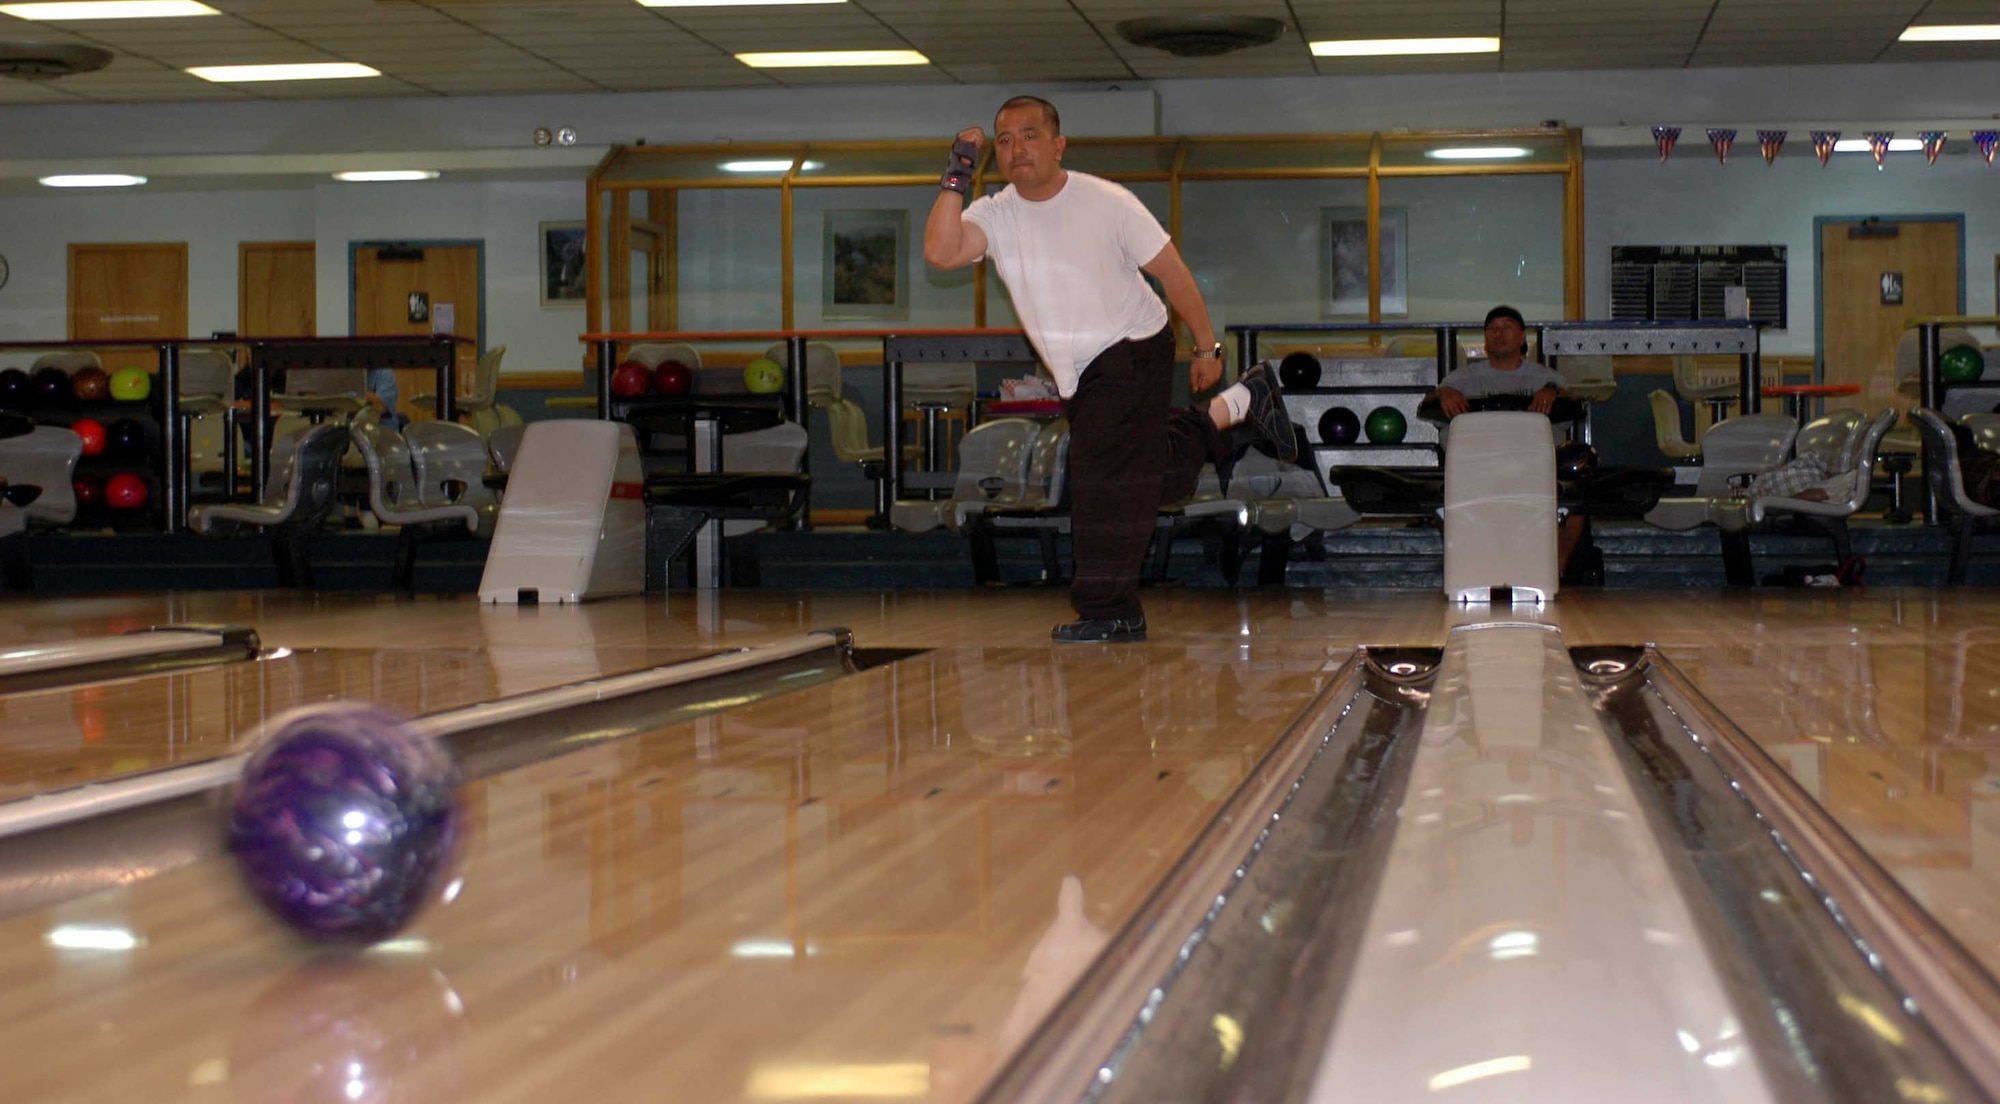 Charlie Alonga hurls his bowling ball down a lane at Travis Bowling Center. Travis’ Bowling Center has one of the highest number of lines, which are the number of individuals playing a game, in the Air Force. (U.S. Air Force photo/Nick DeCicco)